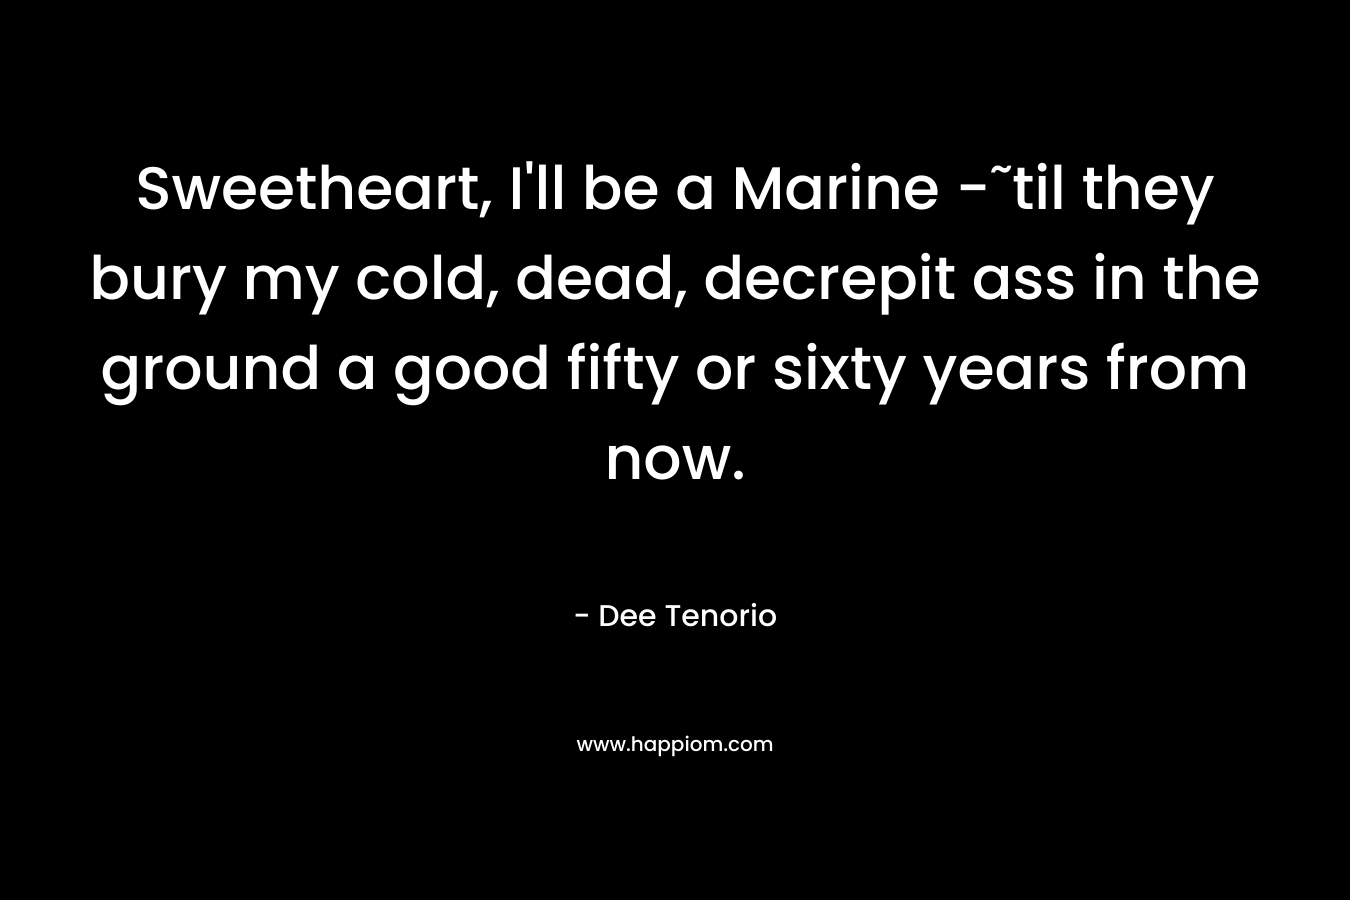 Sweetheart, I’ll be a Marine -˜til they bury my cold, dead, decrepit ass in the ground a good fifty or sixty years from now. – Dee Tenorio